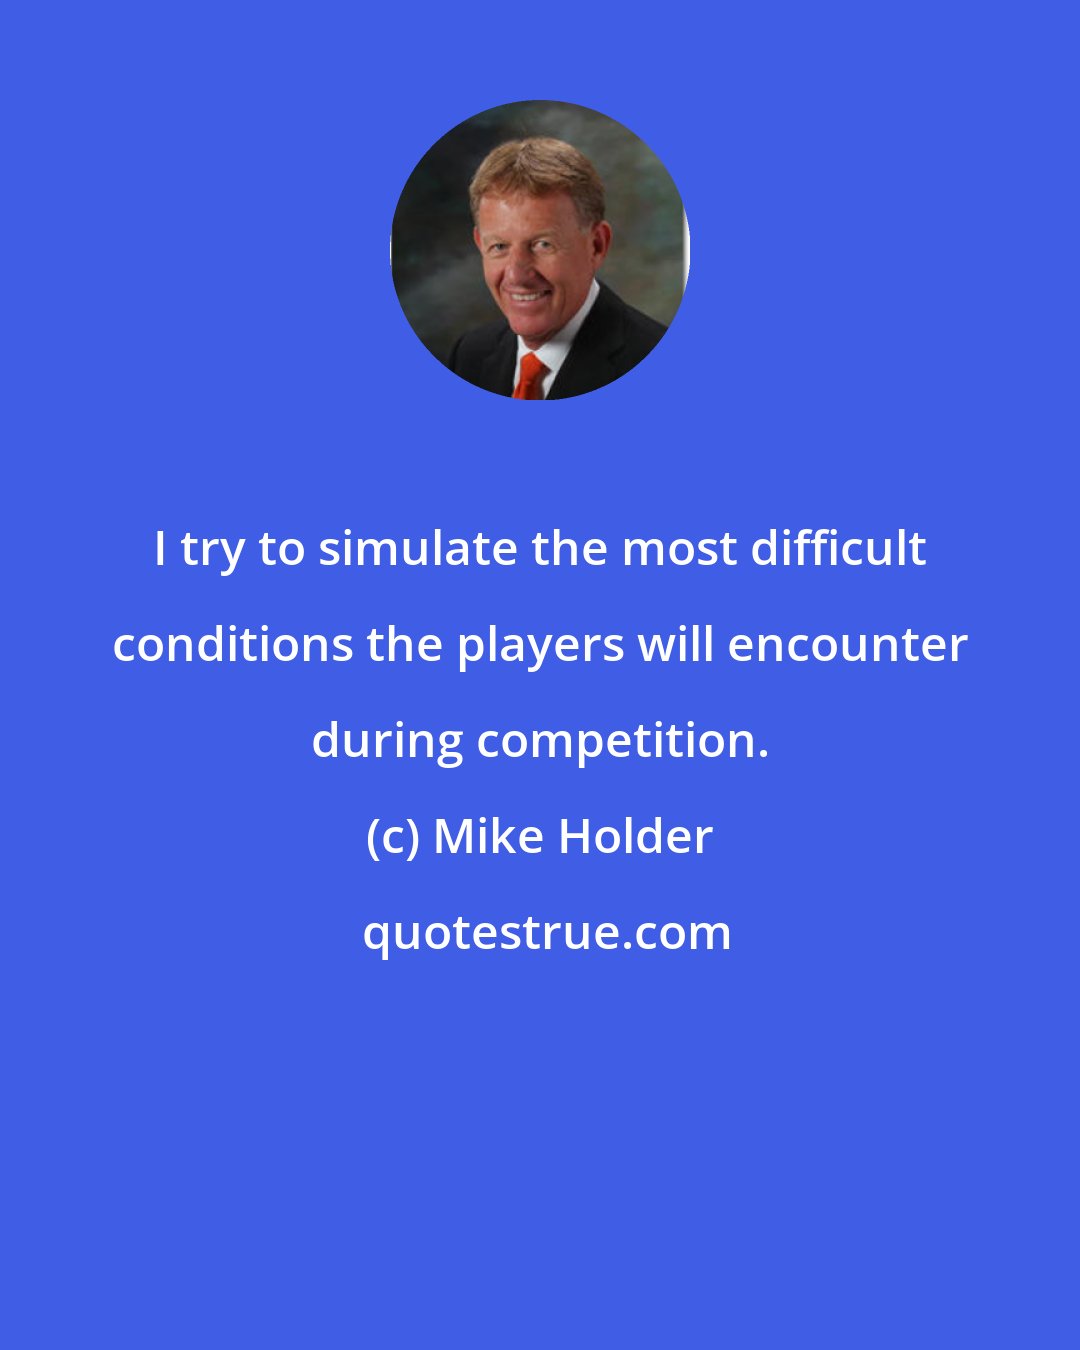 Mike Holder: I try to simulate the most difficult conditions the players will encounter during competition.